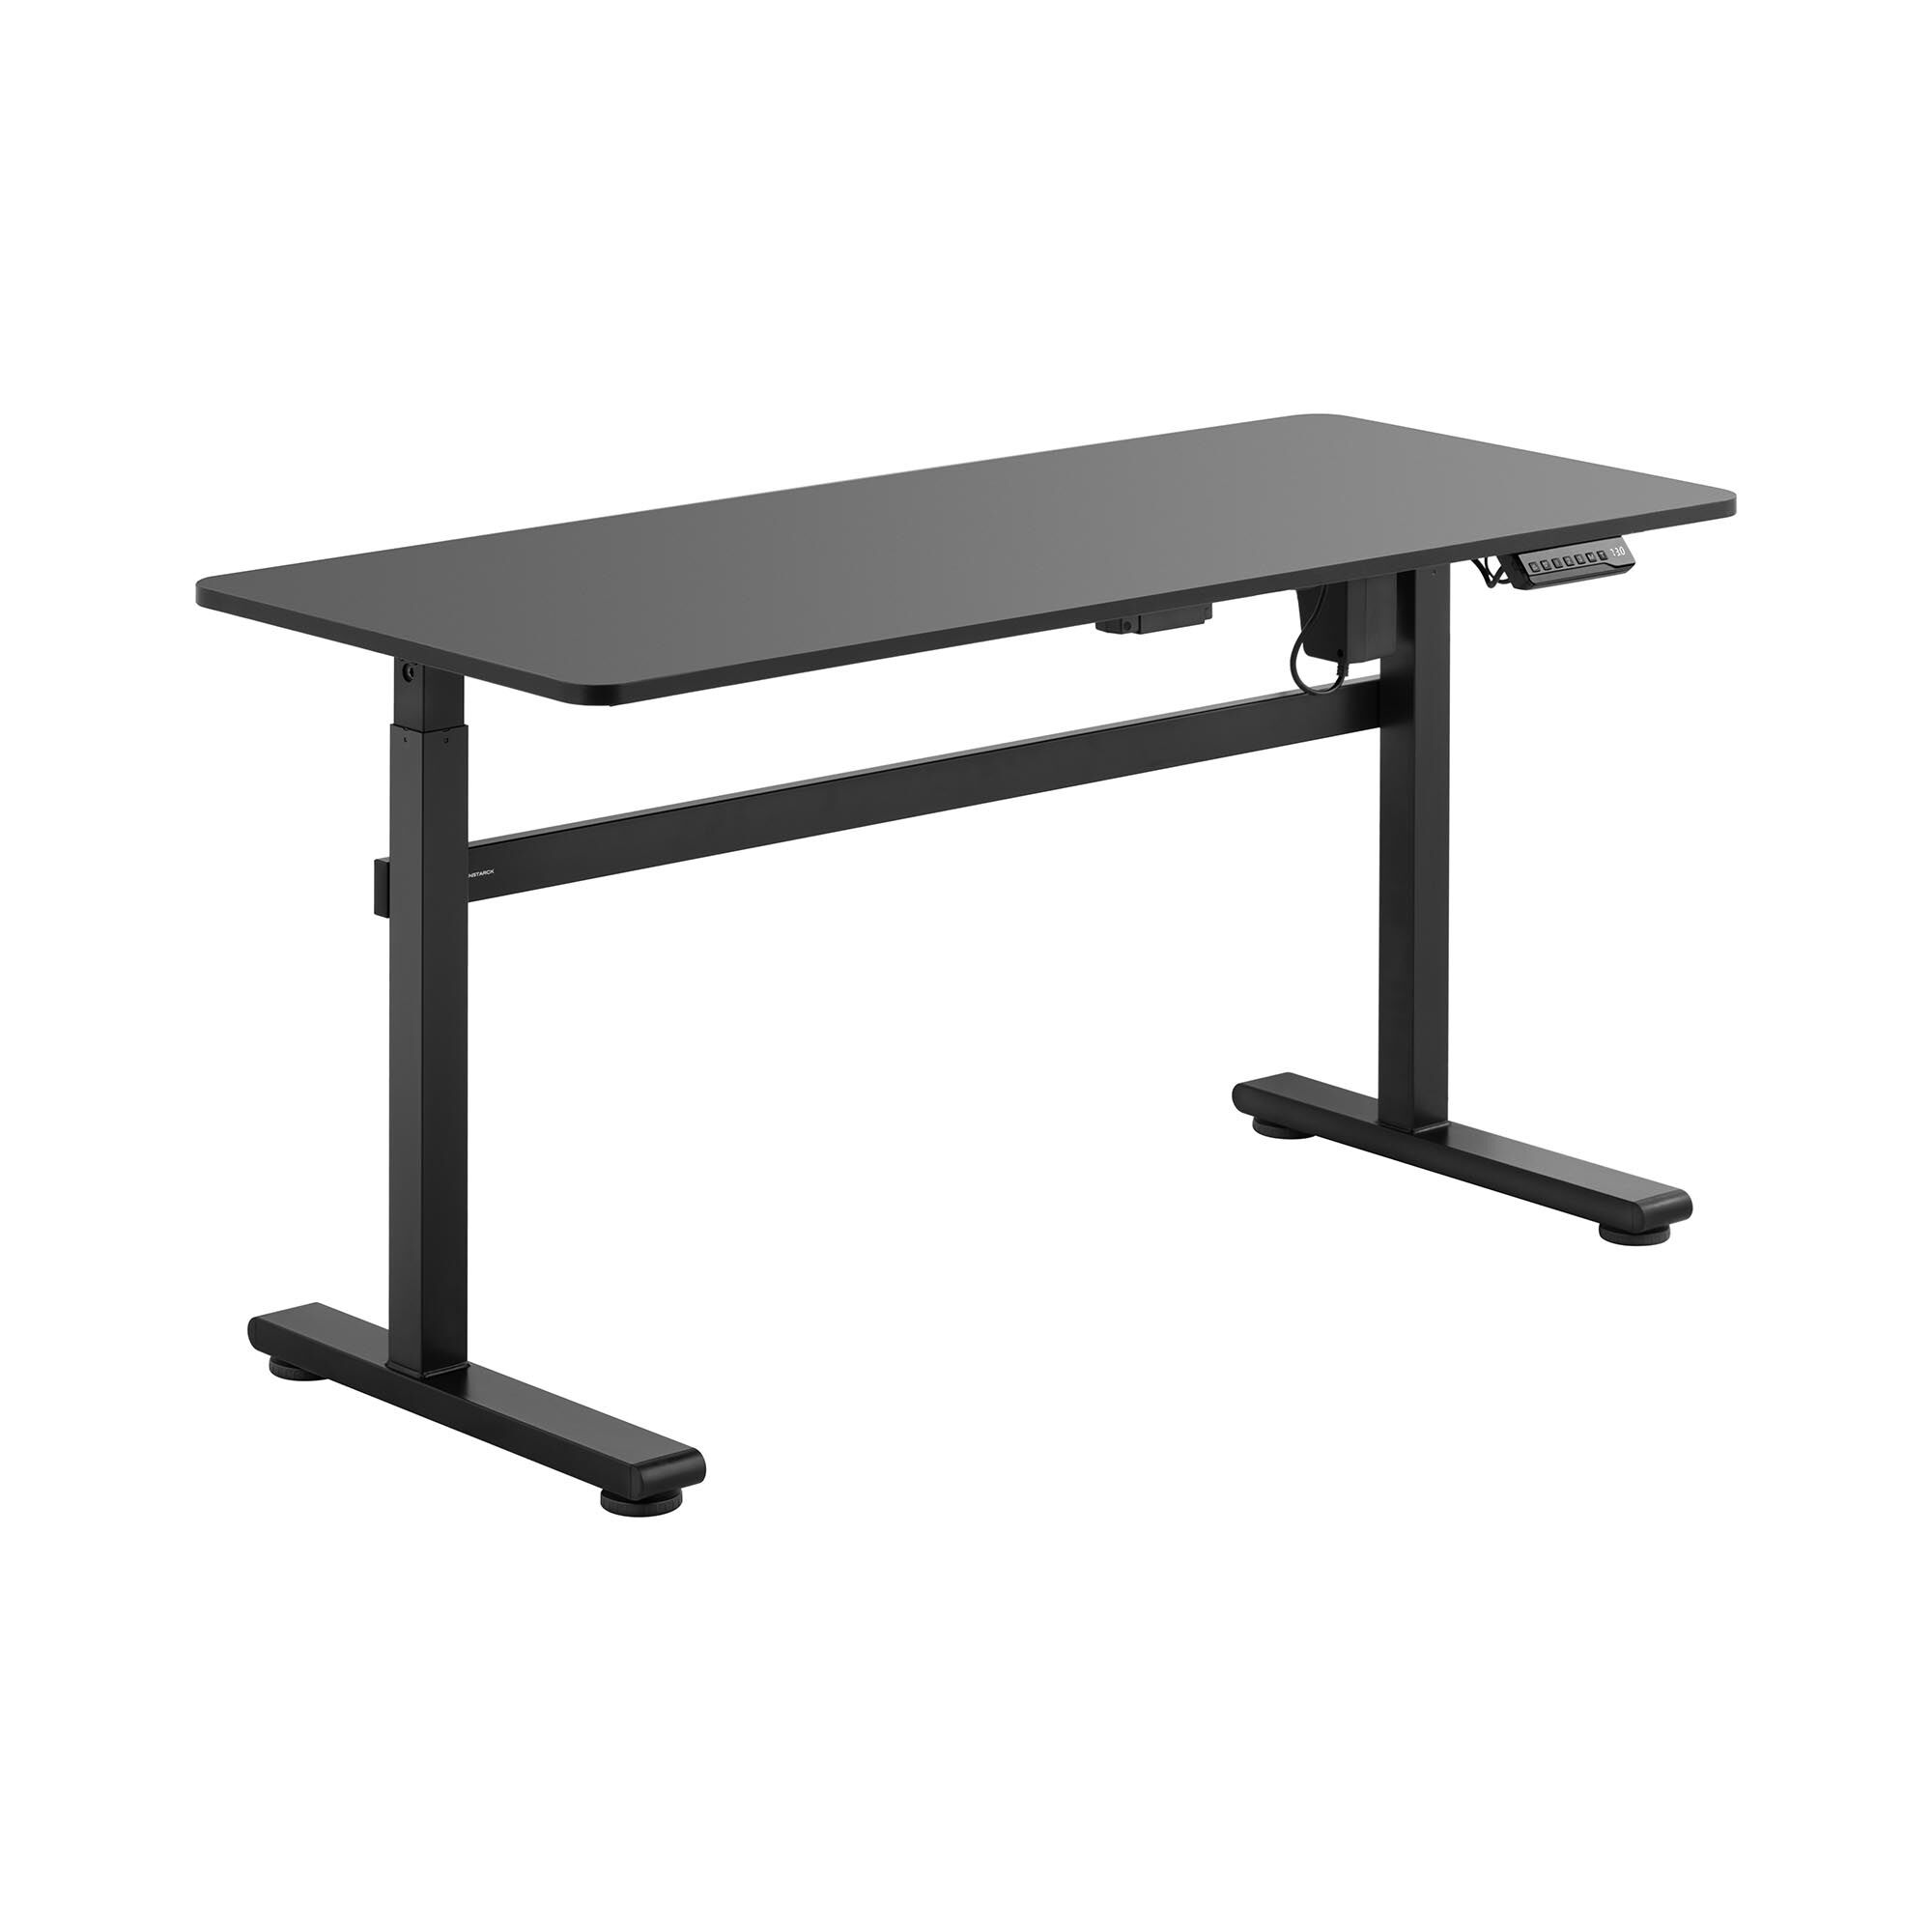 Fromm & Starck Sit-Stand Desk - 1,400 x 600 mm - Powder-coated steel